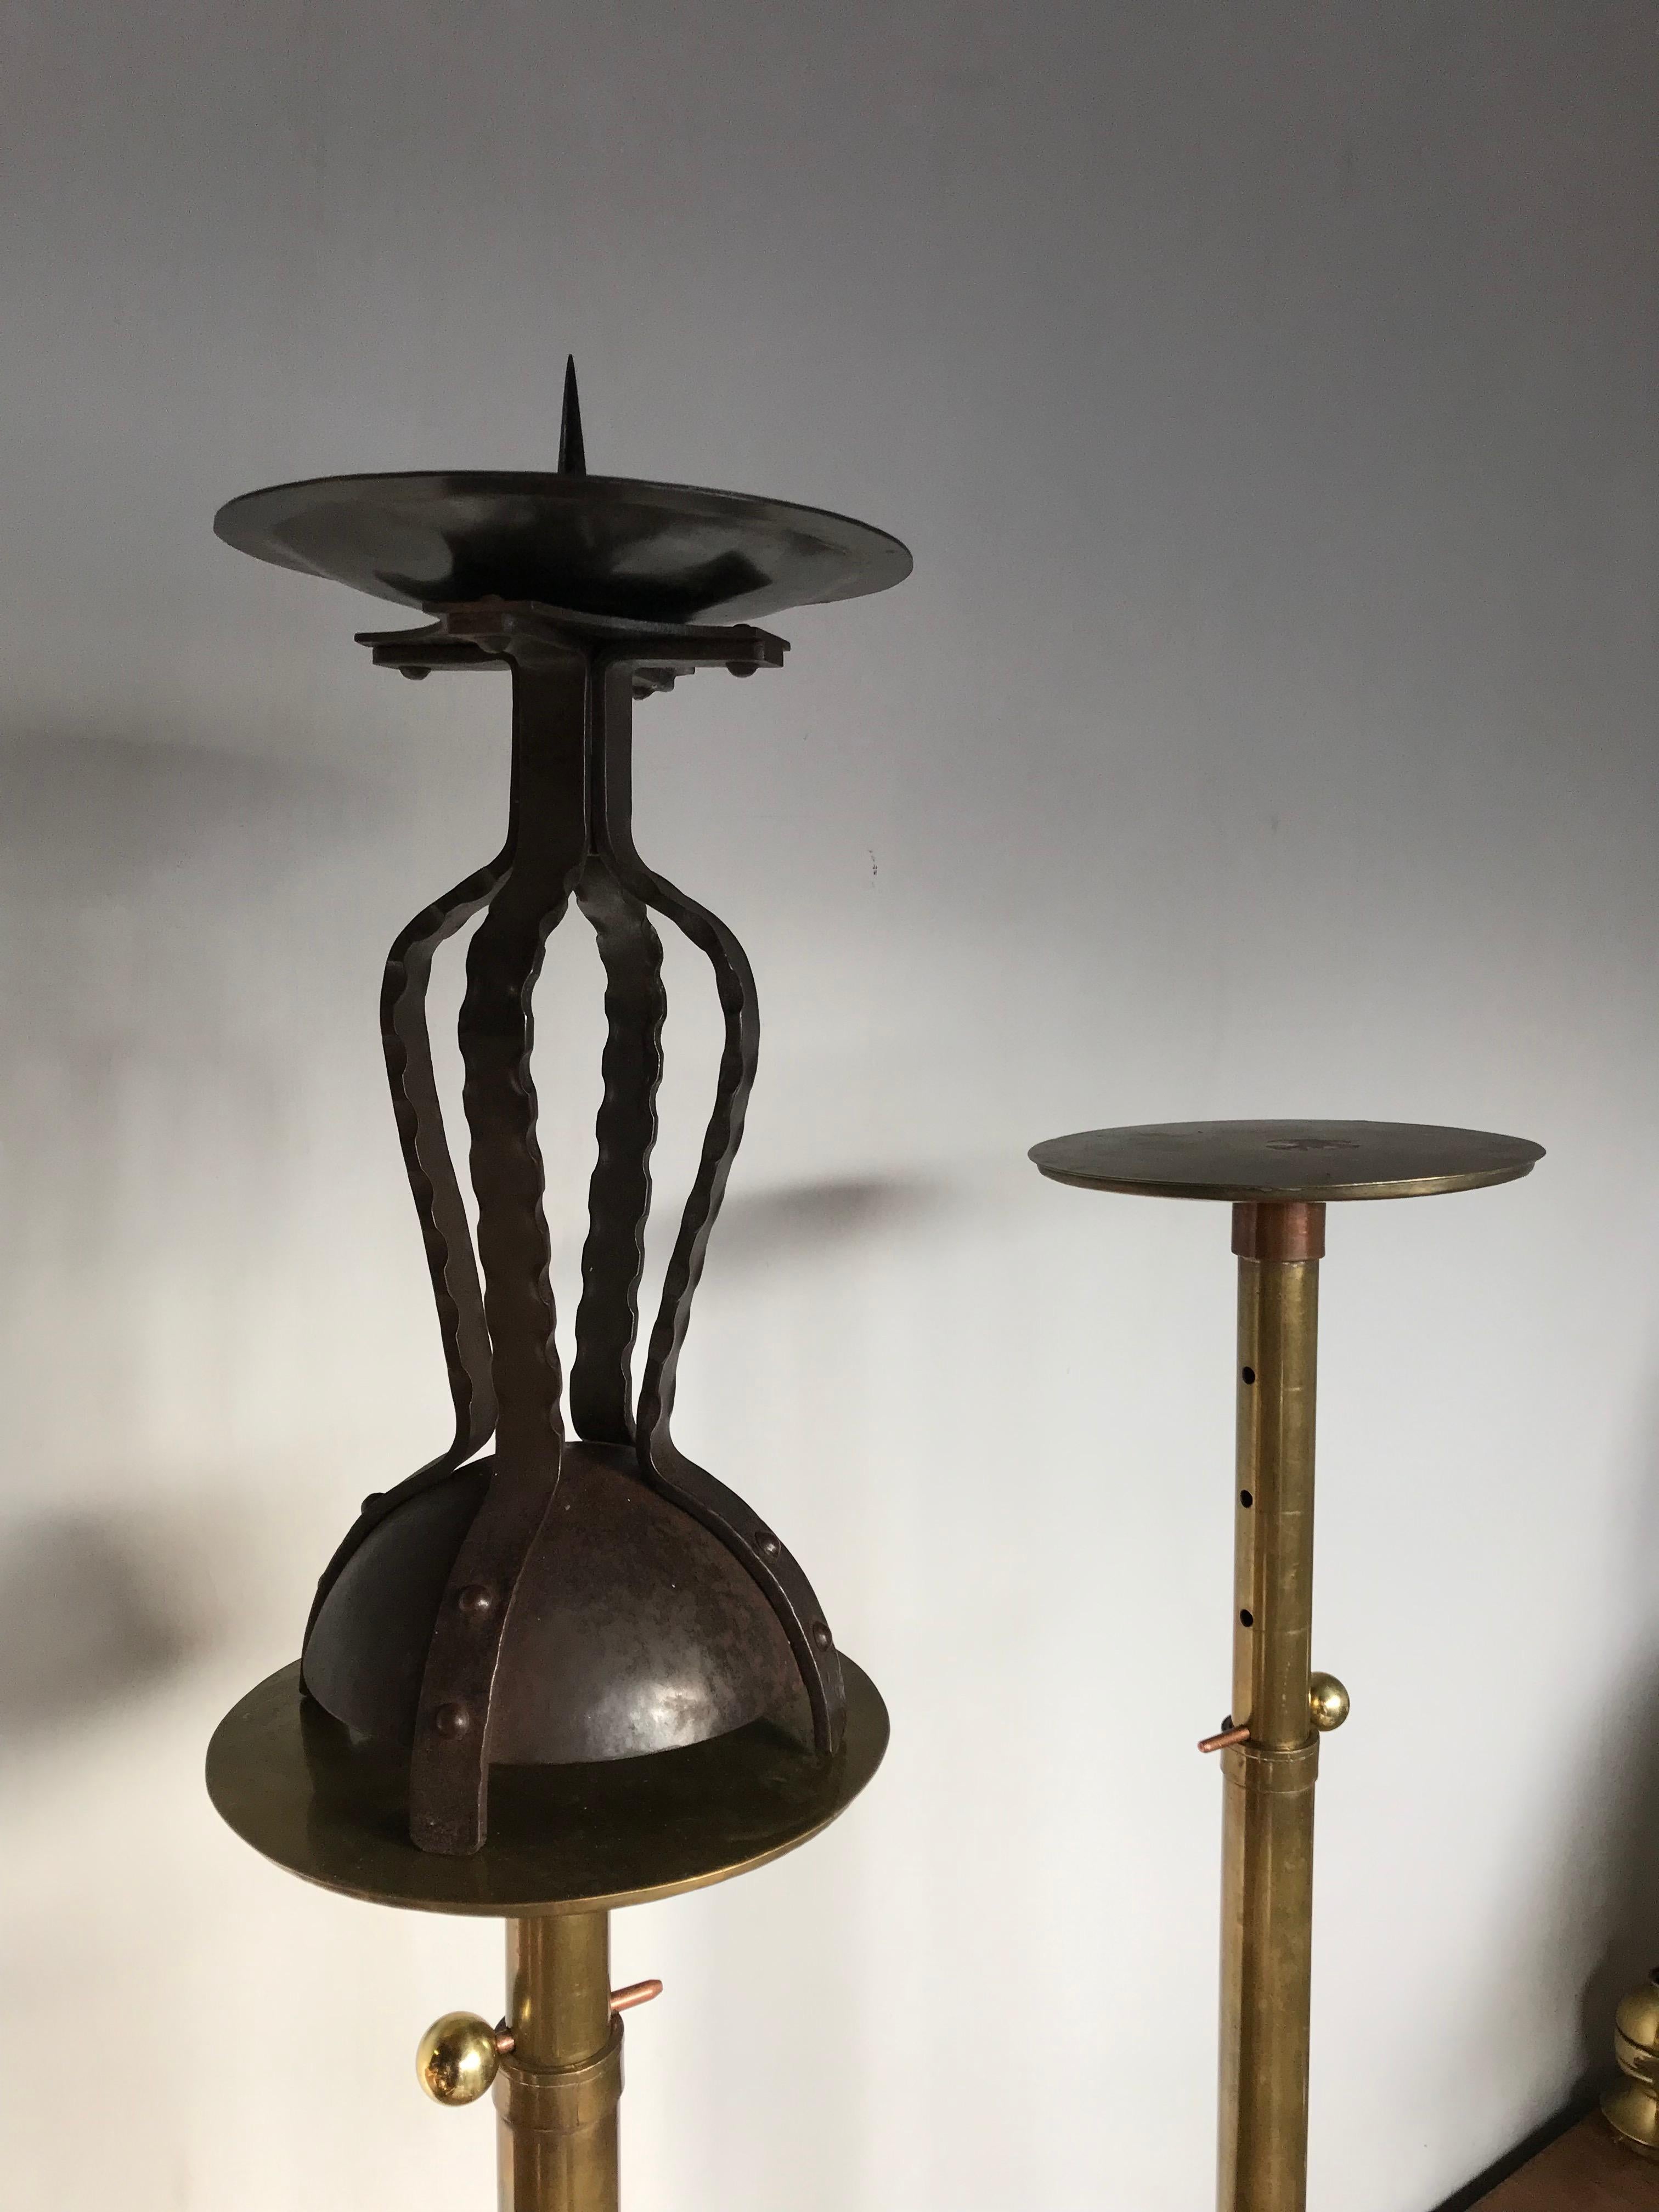 Arts and Crafts Artistic Design and All Handcrafted, Wrought Iron Arts & Crafts Candlestick For Sale